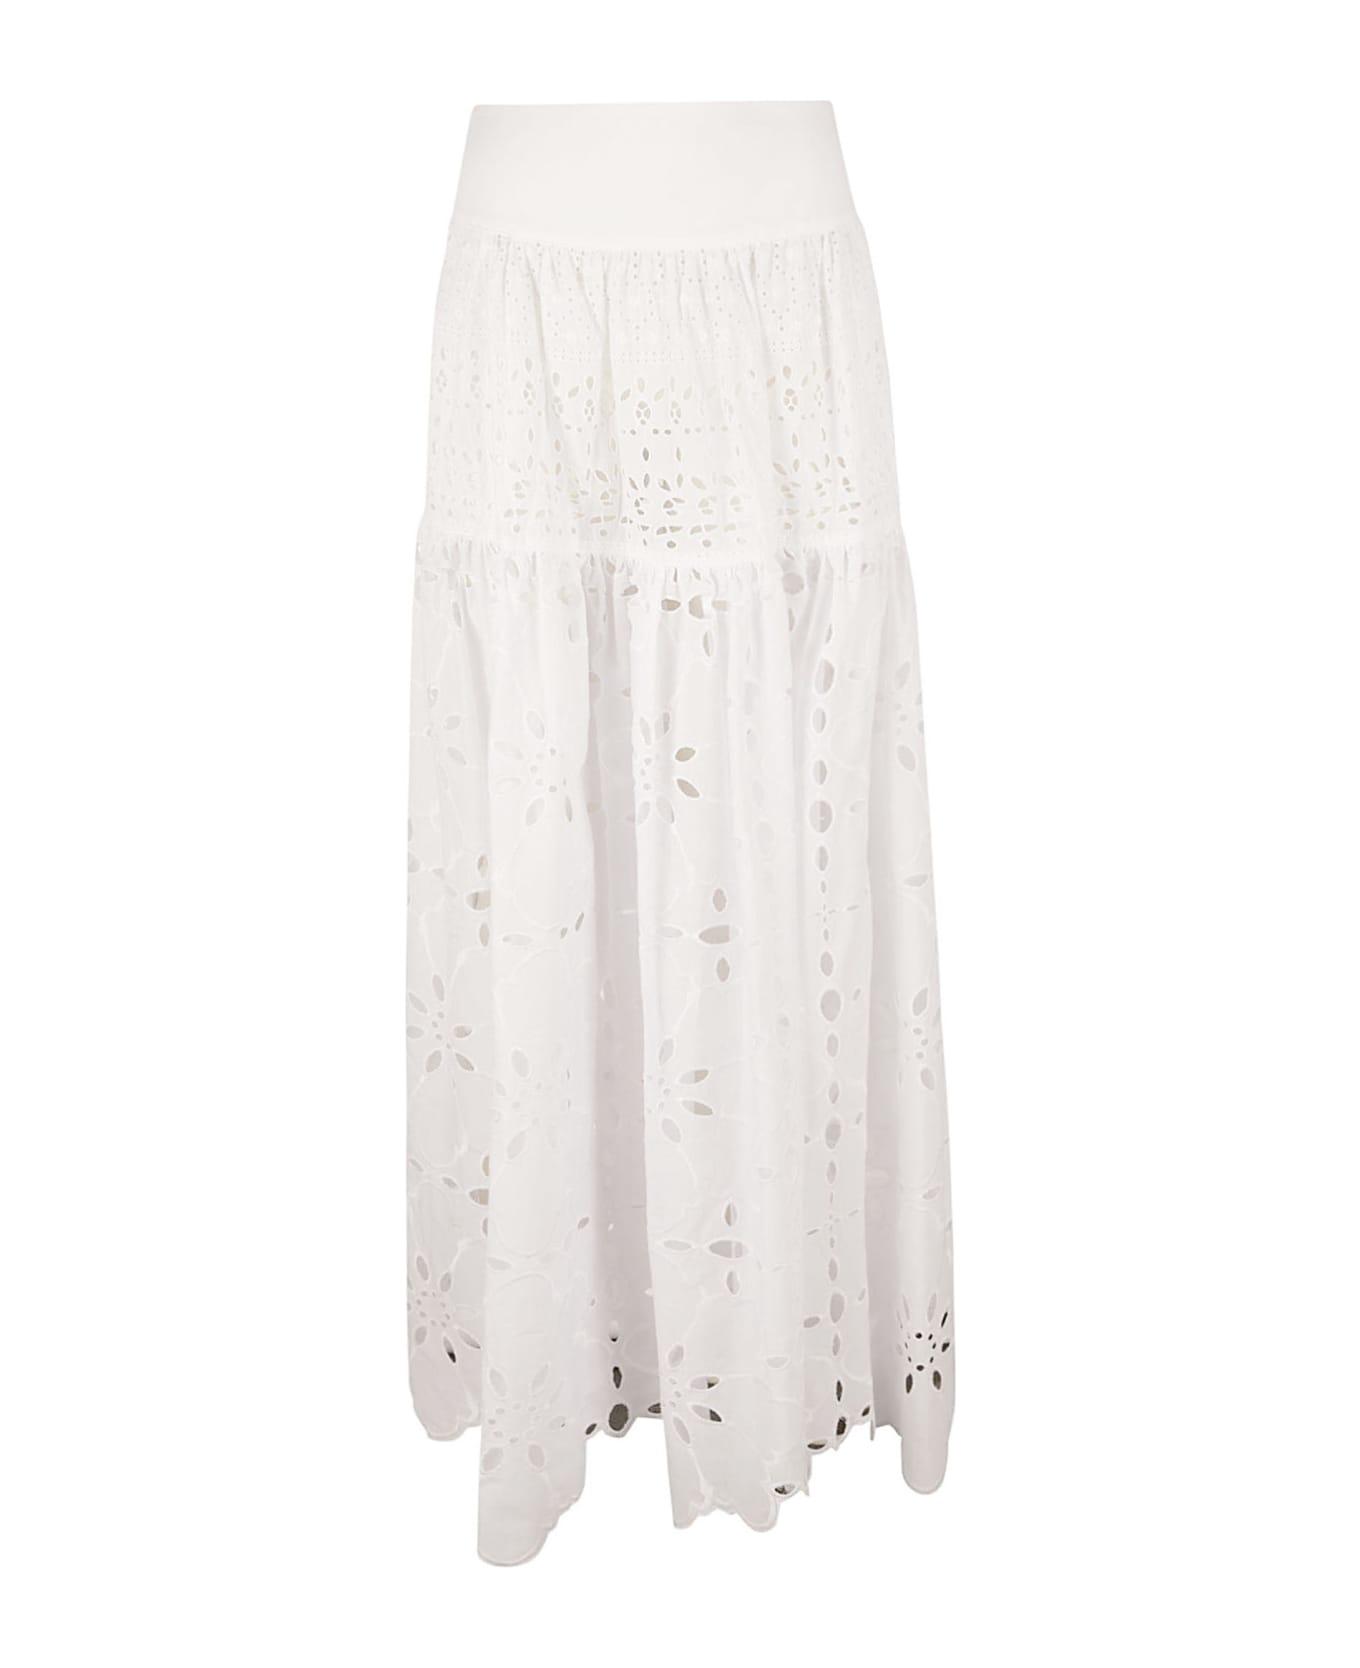 Ermanno Scervino High-waist Floral Perforated Skirt - Bright White